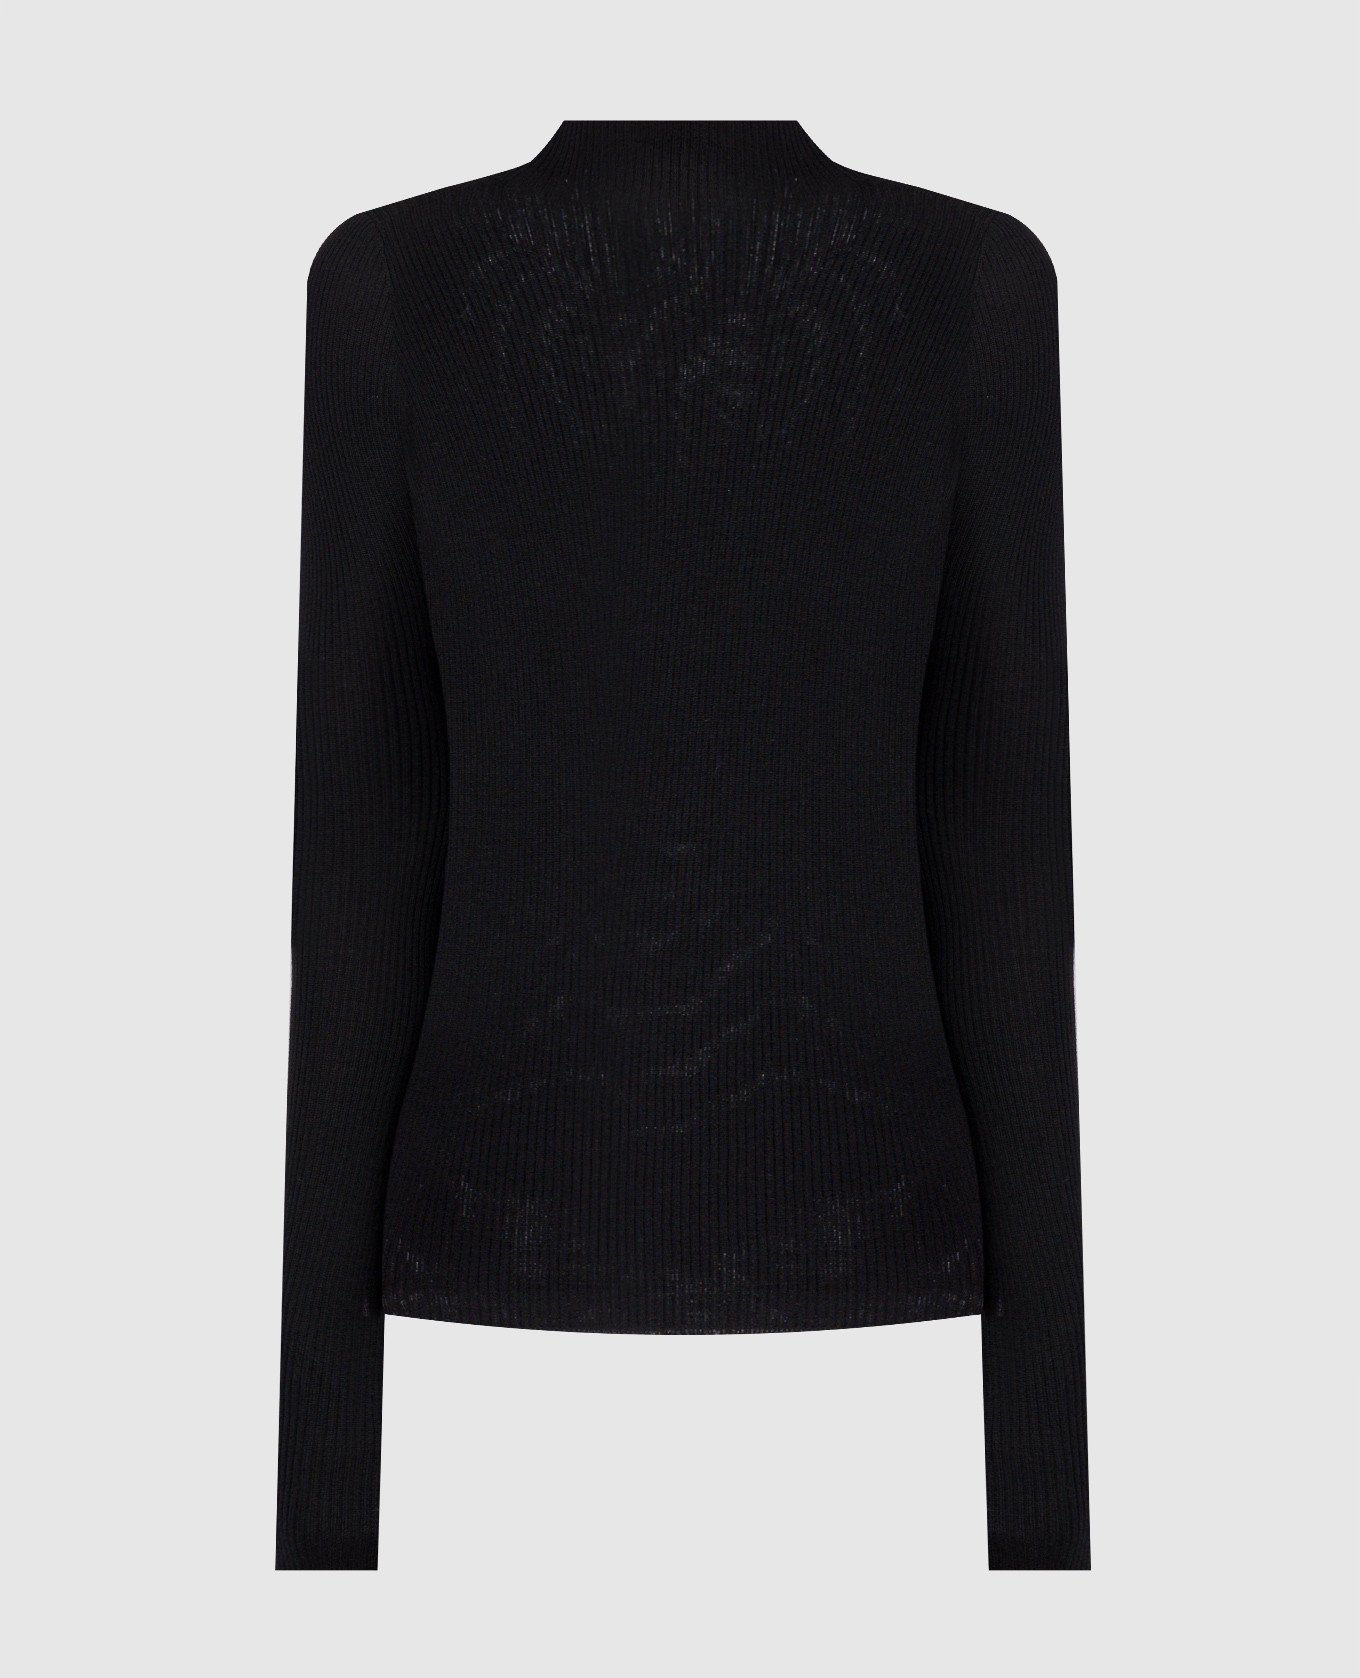 Black turtleneck with ribbed wool